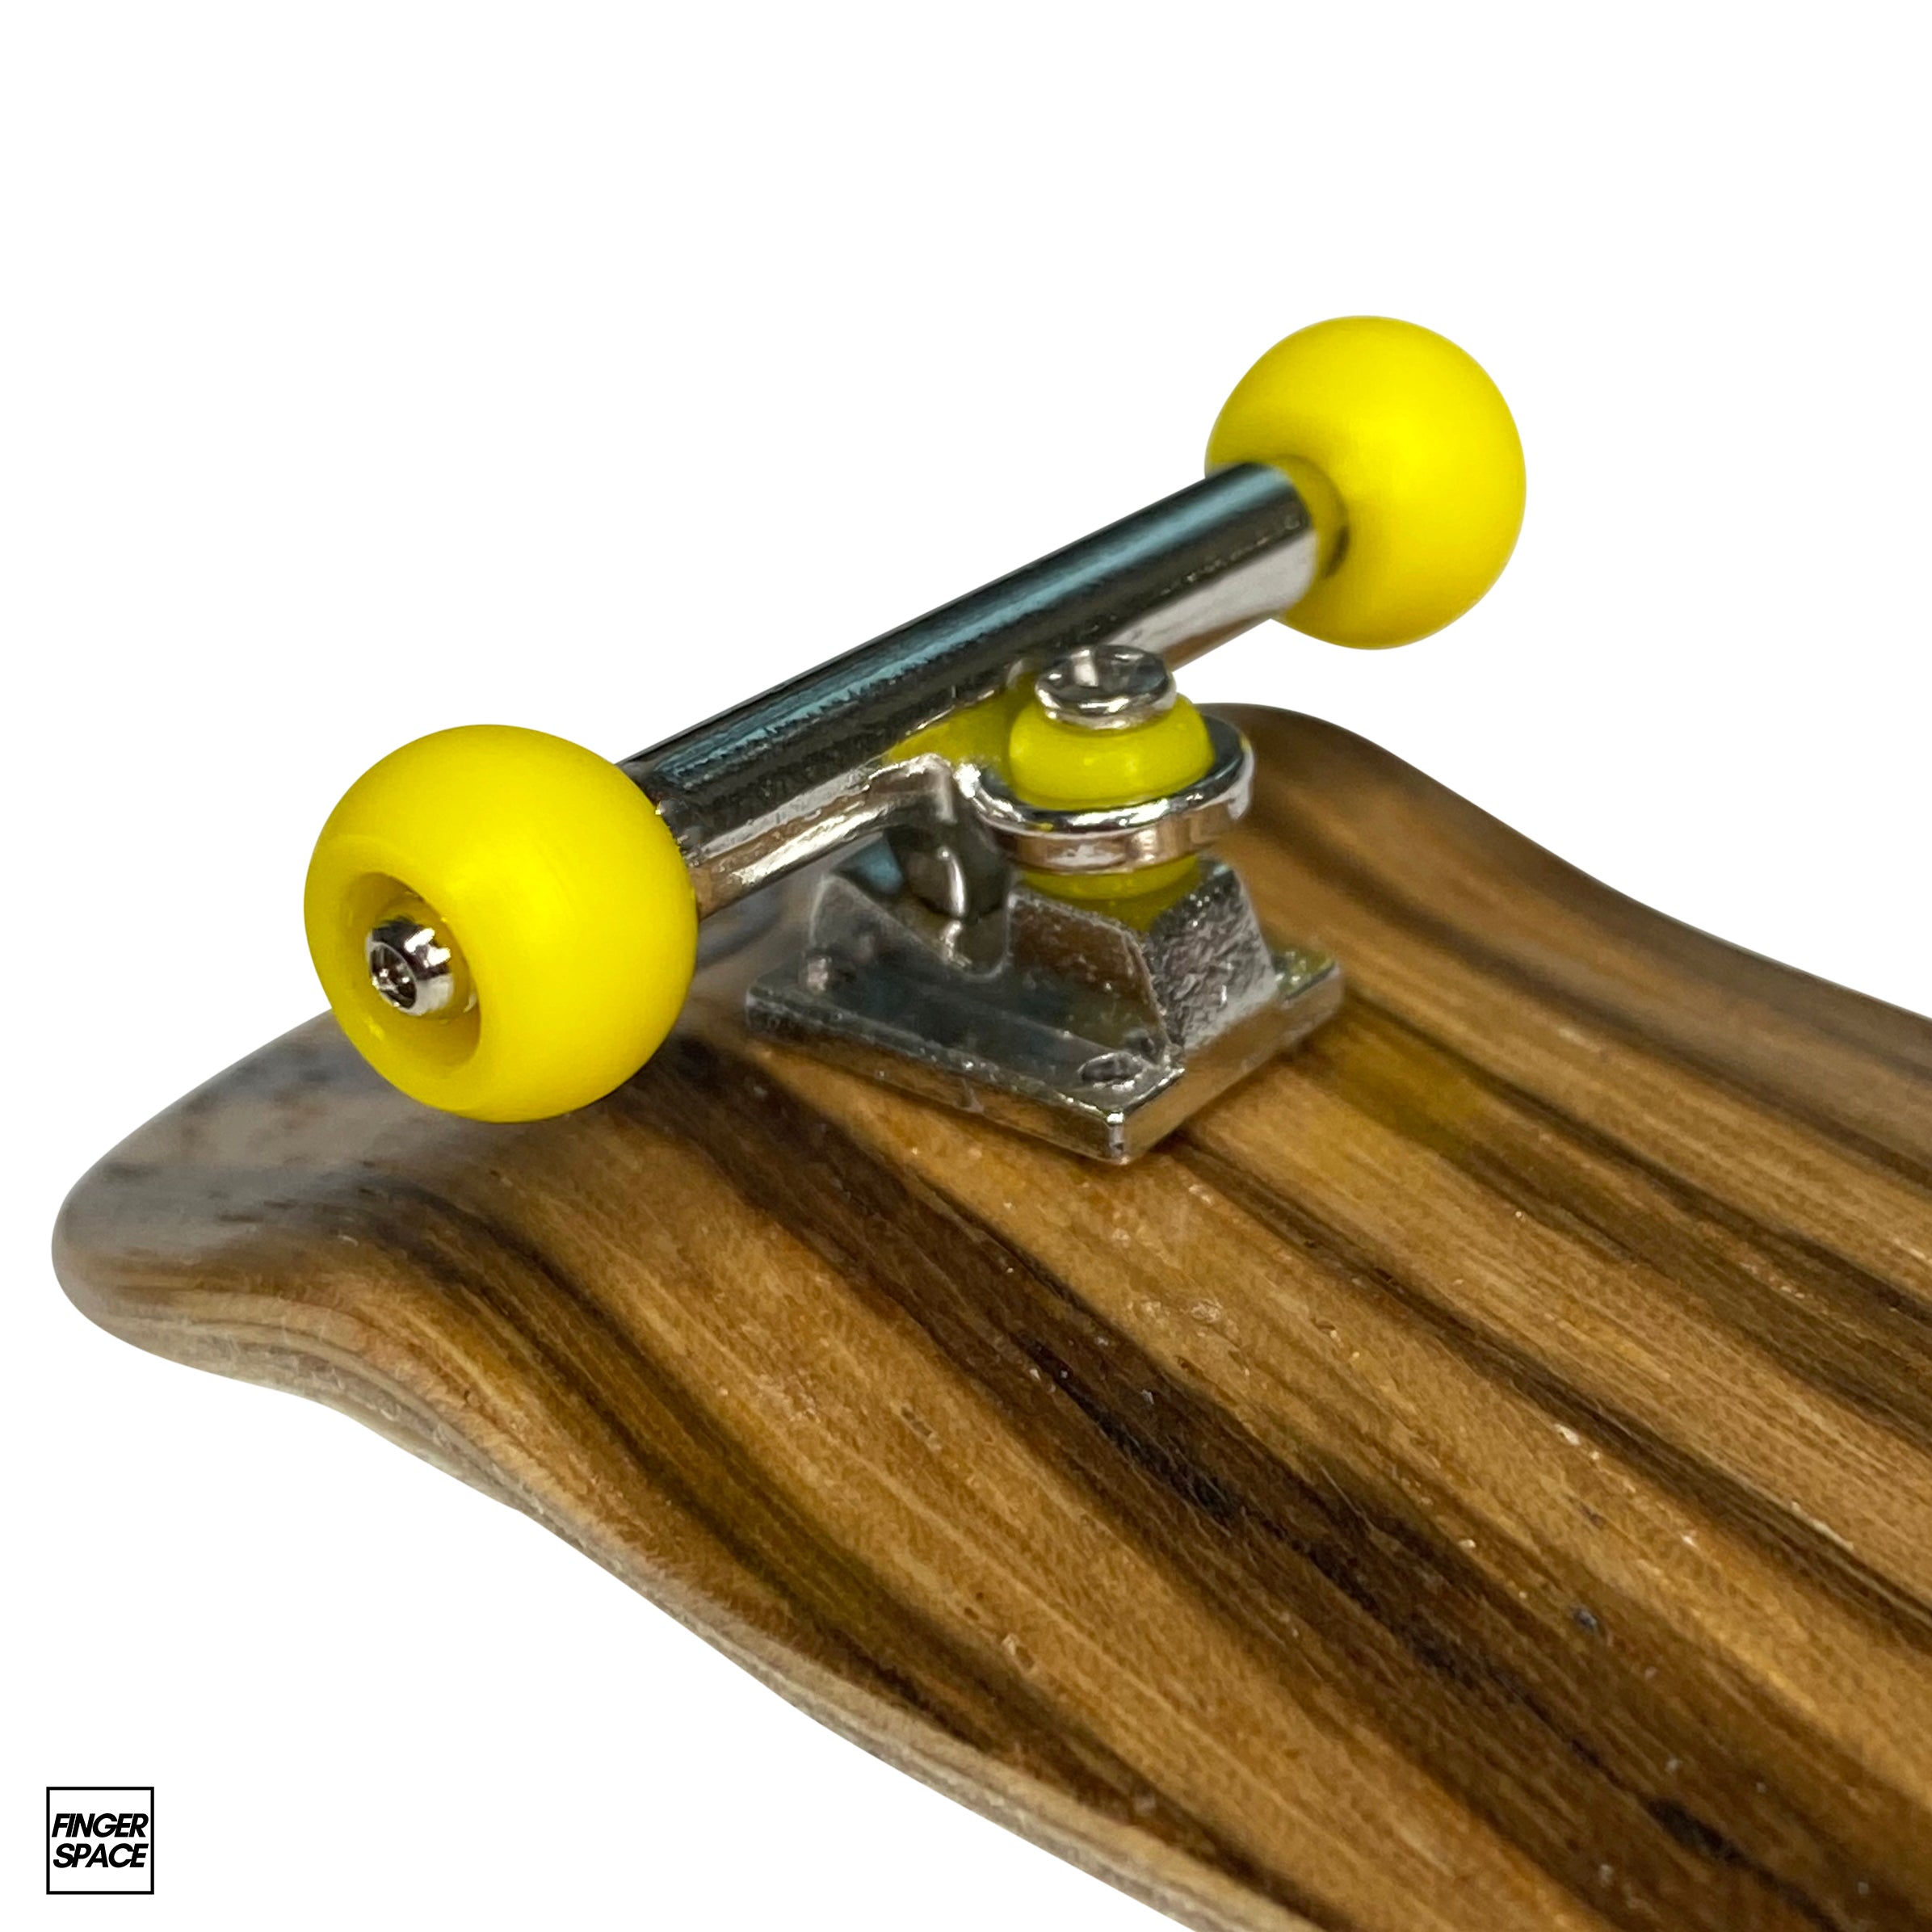 34mm Pro Inverted Kingpin Fingerboard Trucks - "Chroma" Colorway